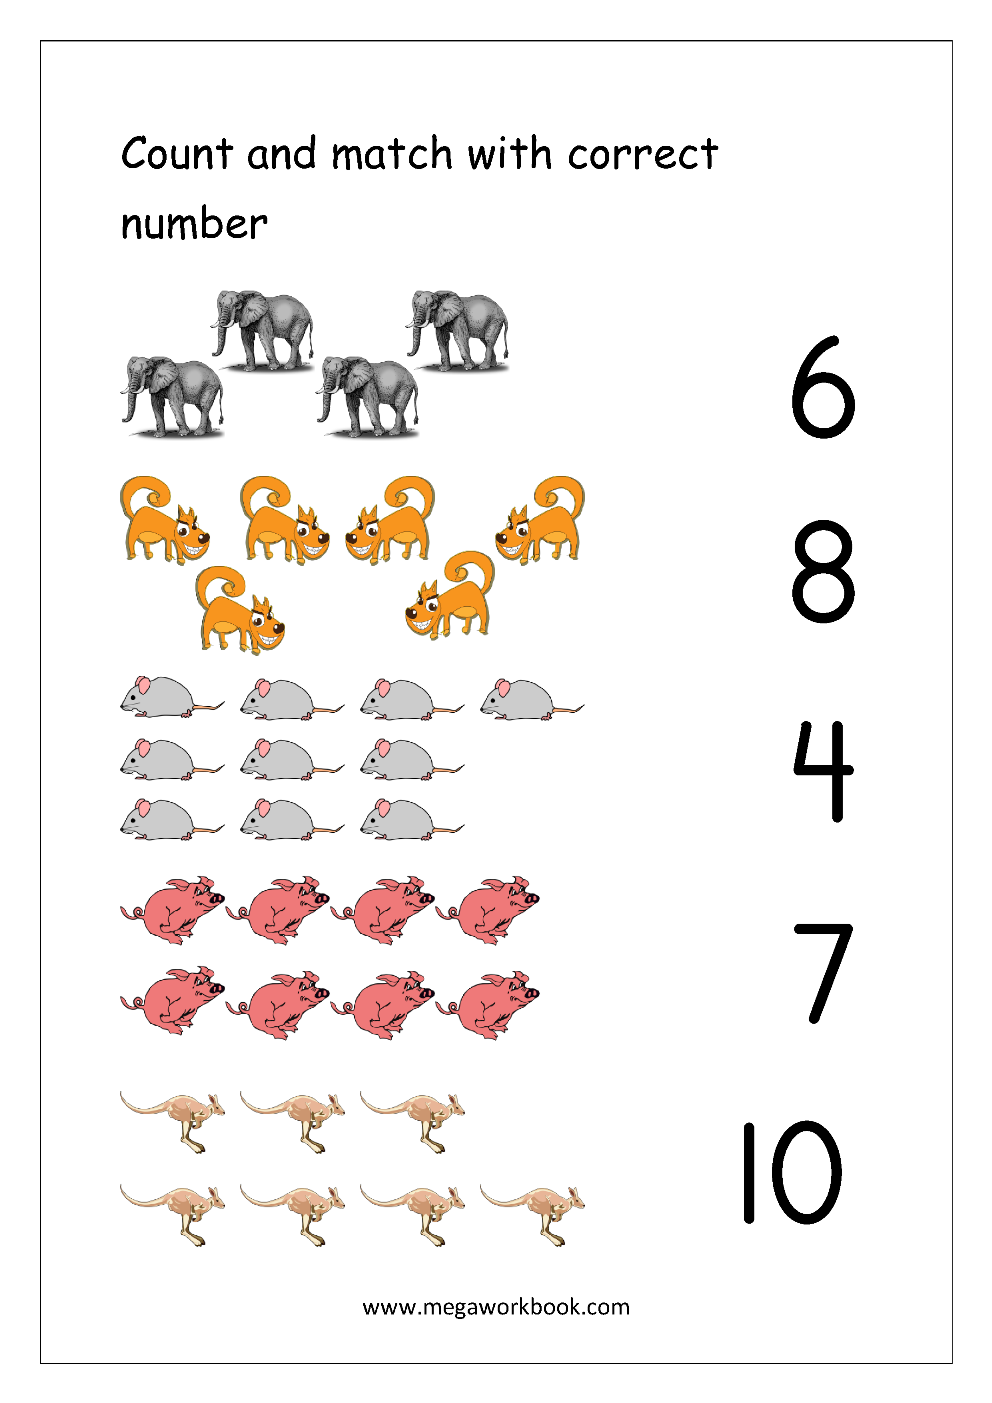 Number Matching Worksheets 11 20